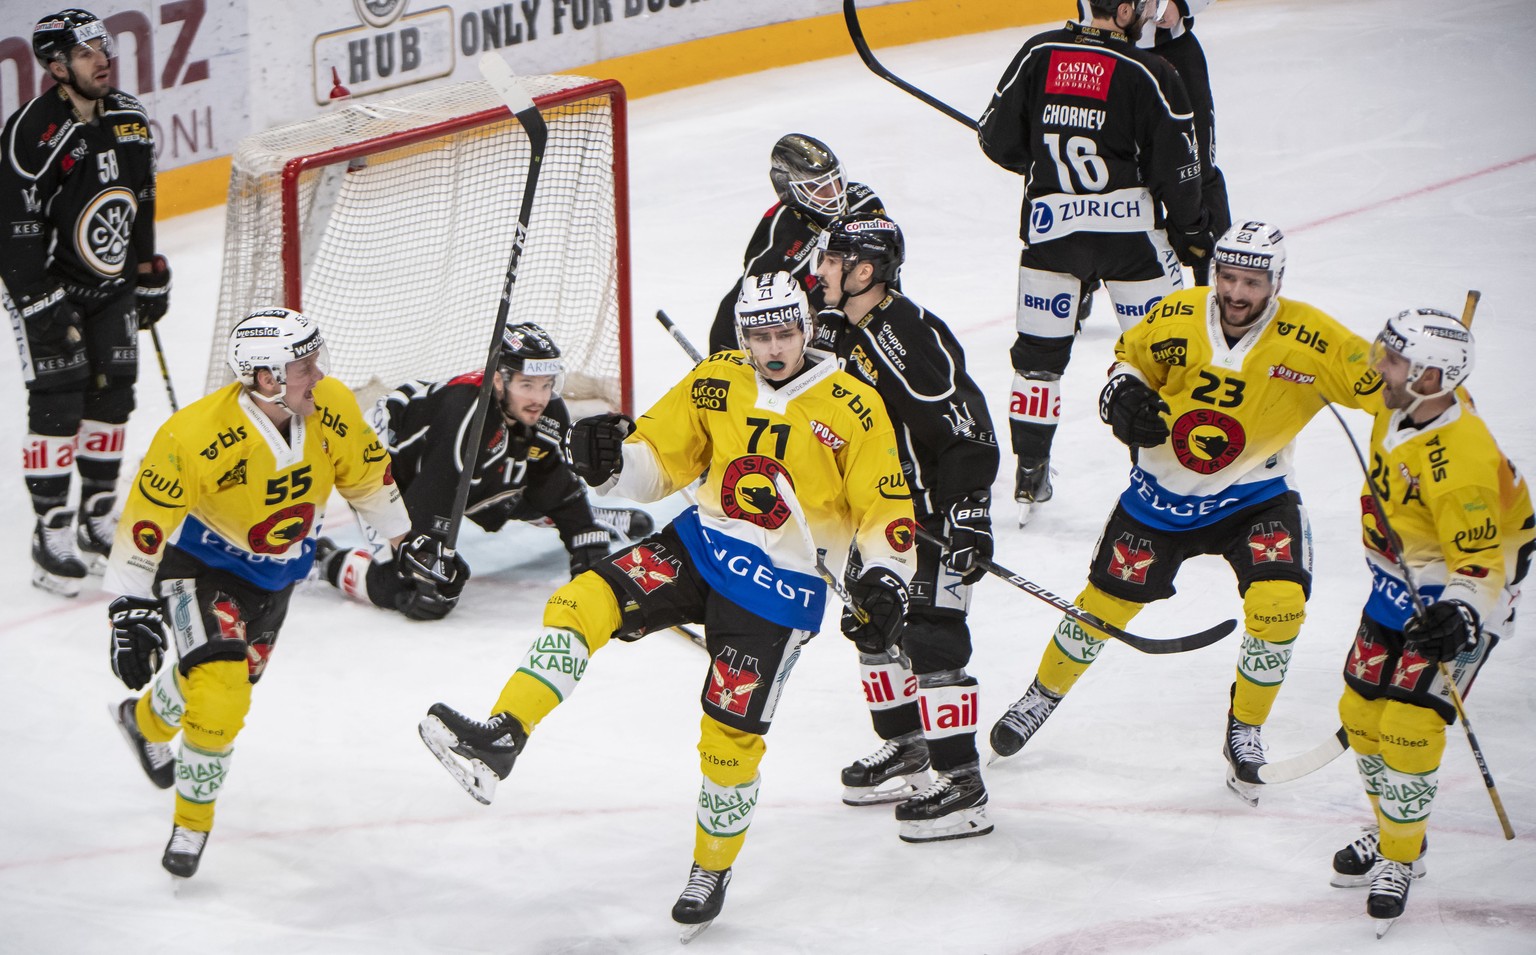 Bern&#039;s player Jeremi Gerber, celebrate 0-1 gool , during the preliminary round game of National League A (NLA) Swiss Championship 2019/20 between HC Lugano and SC Bern at the ice stadium Corner A ...